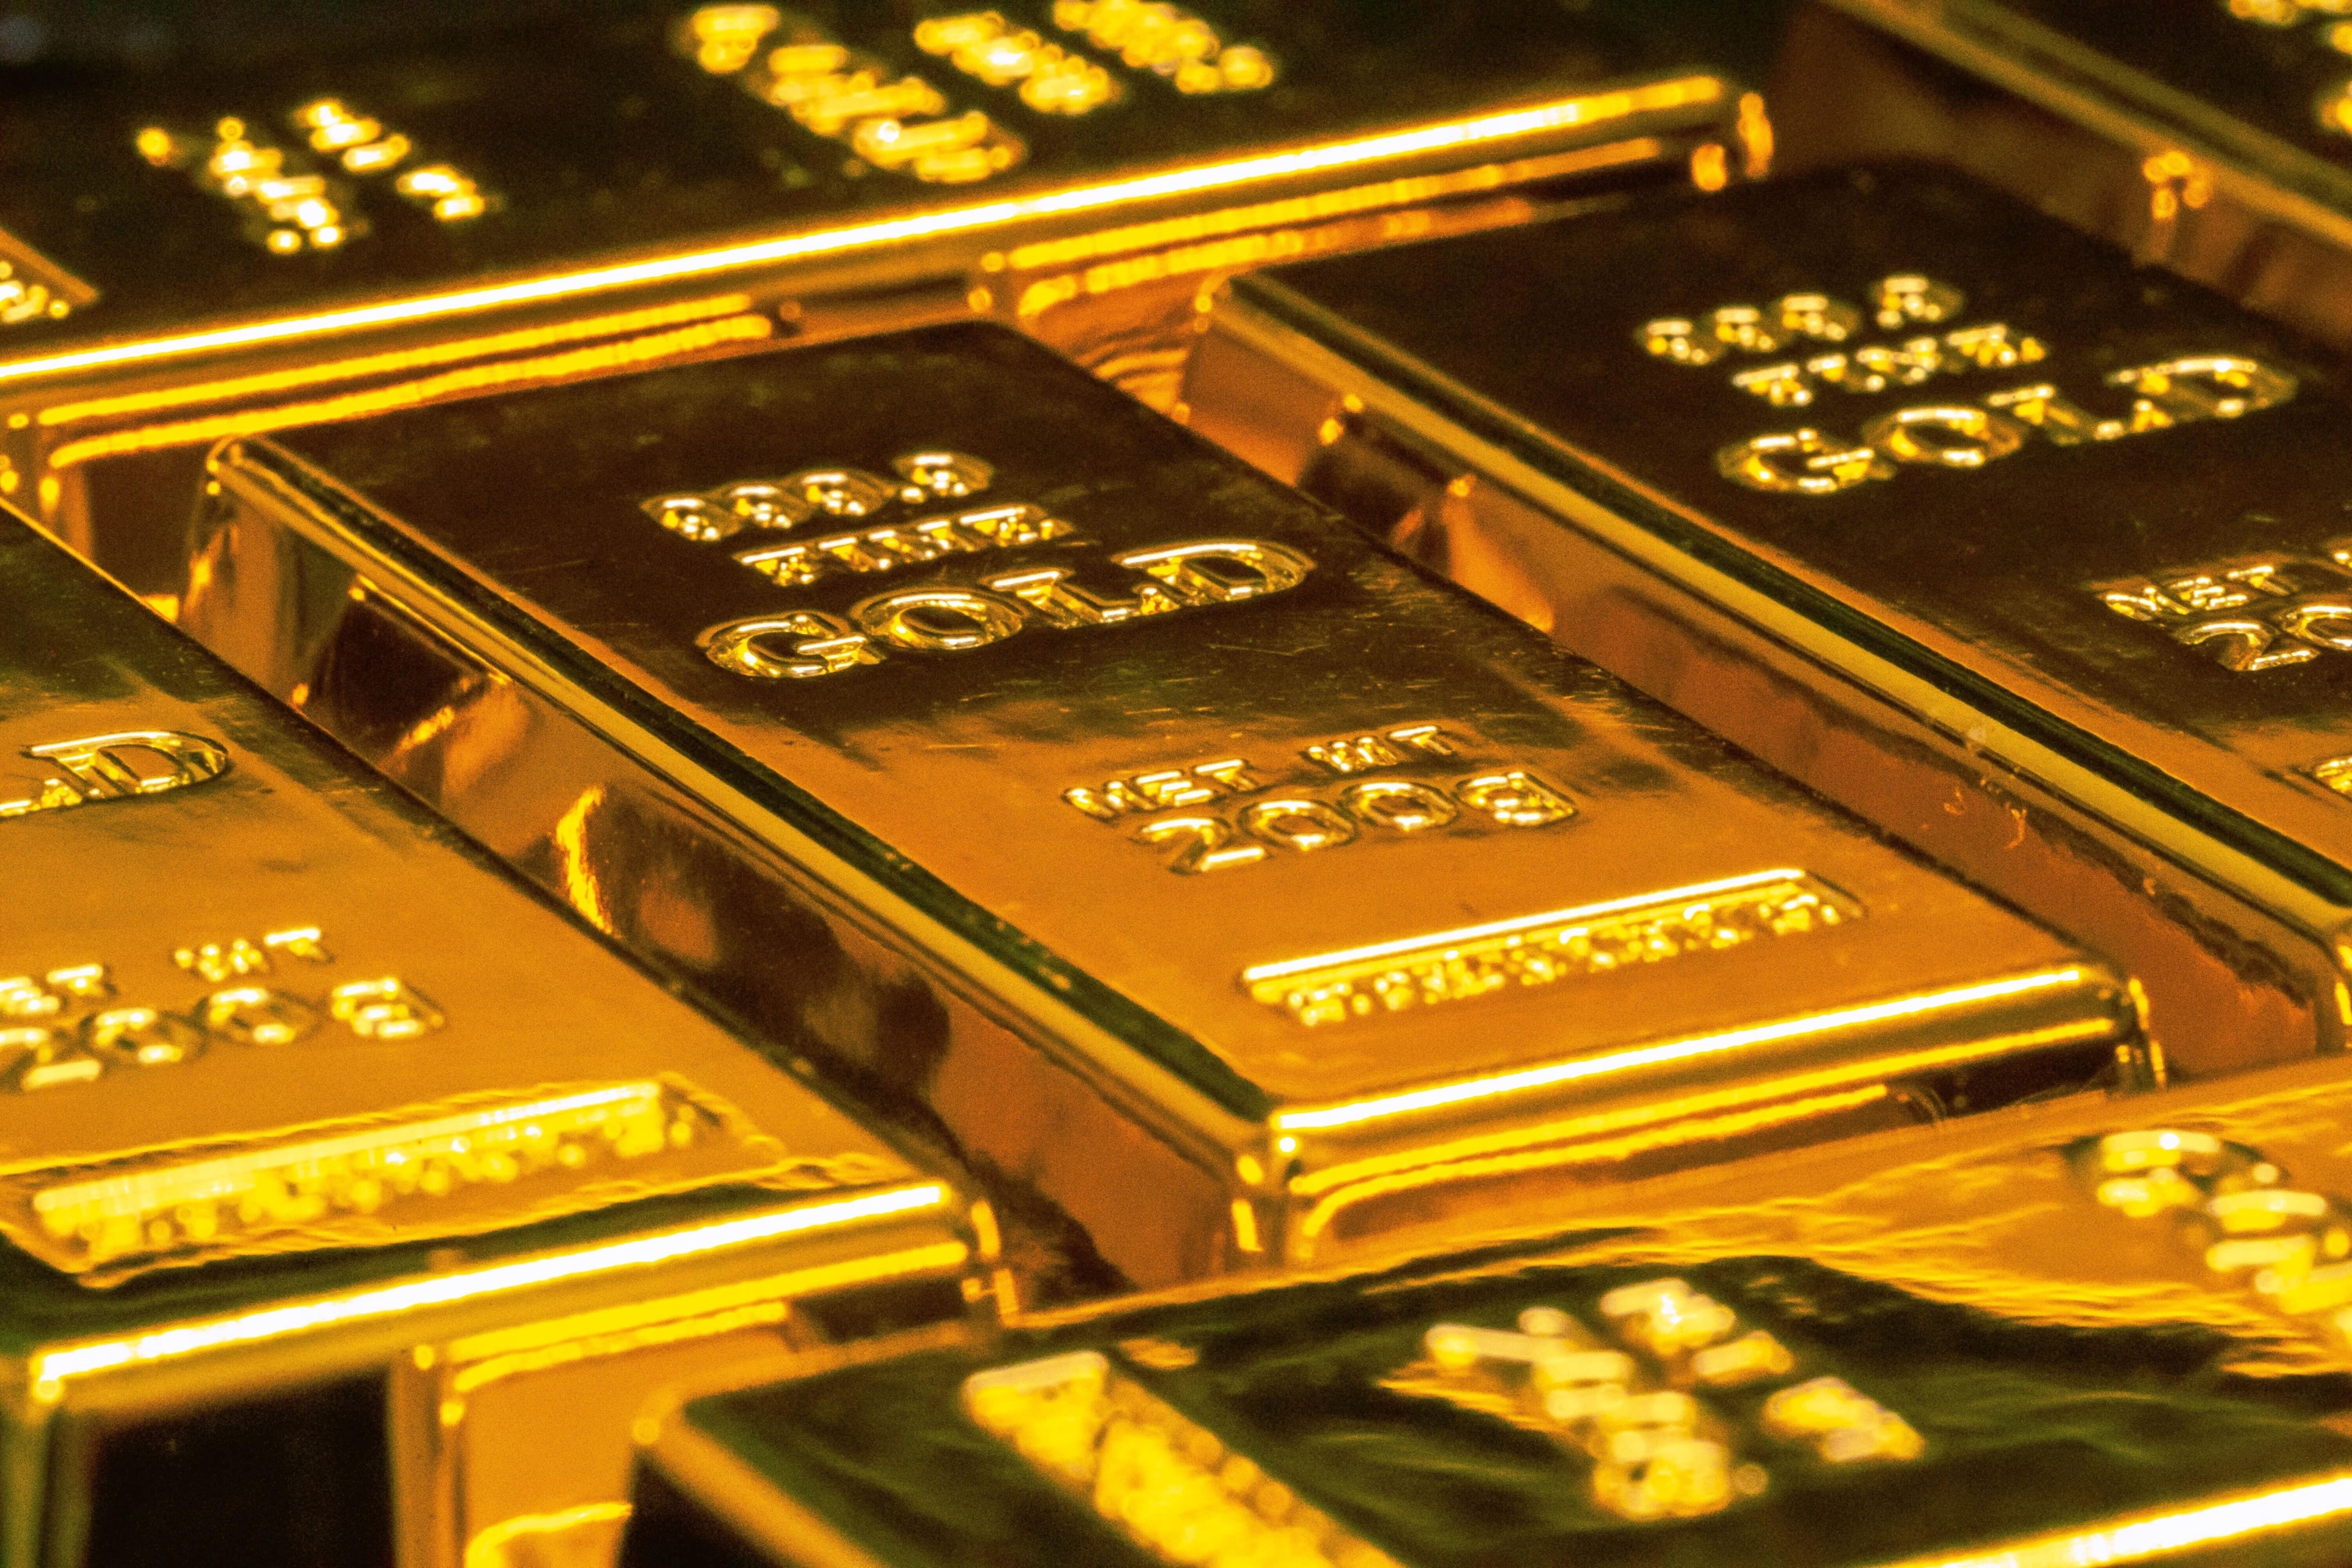 Gold prices climbed on March 21. The precious metal took support from the weakness in the global equity markets due to Russia-Ukraine war and rising coronavirus cases. Gold April futures contract settled at $1929.50 per troy ounce with a gain of 0.41 percent and silver May futures contract settled at $25.31 per troy ounce with a gain of 0.73 percent.